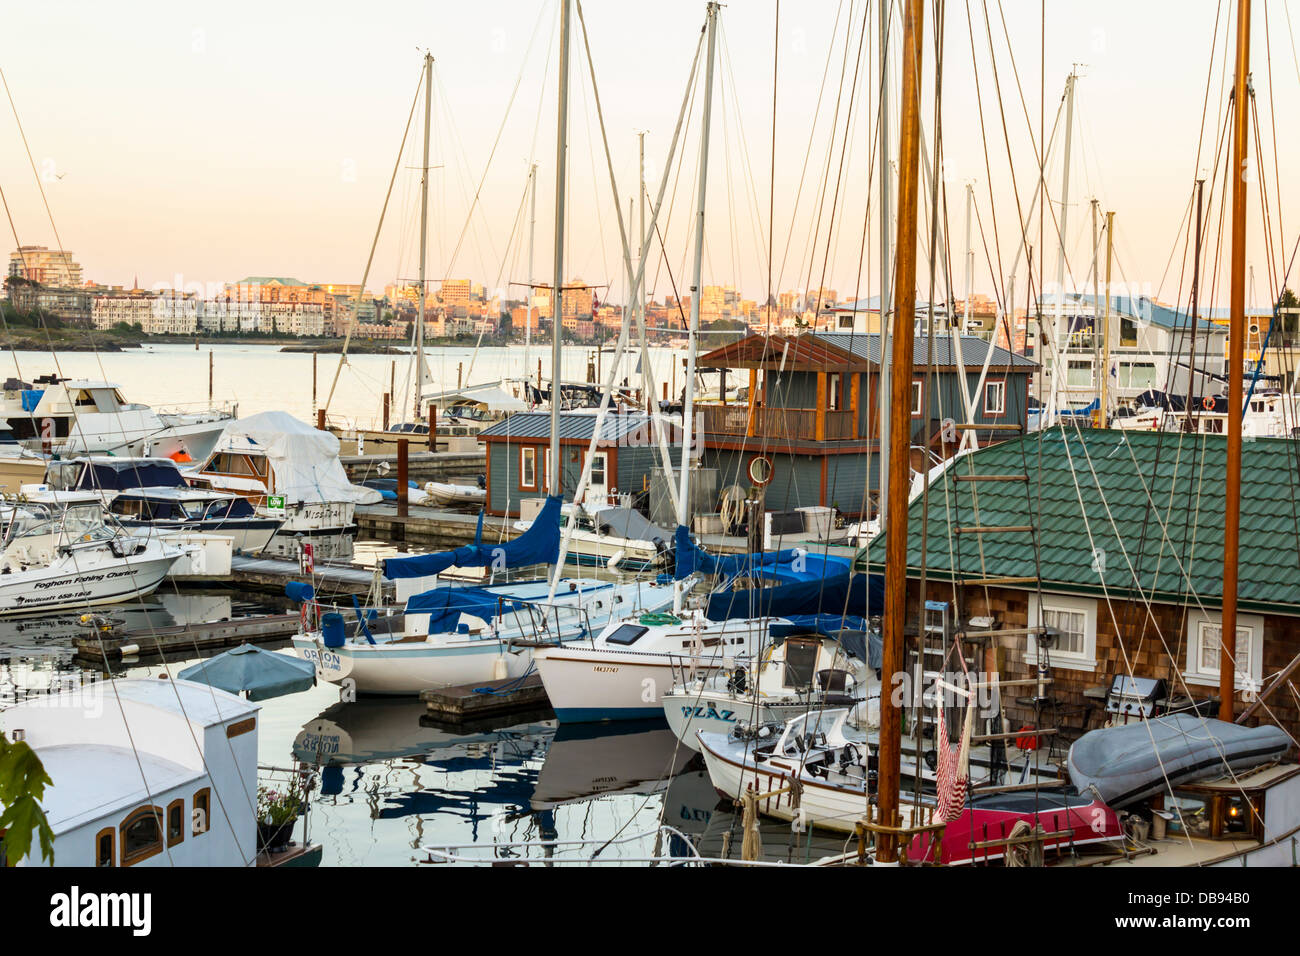 Evening view of West Bay Marina, Victoria, BC, Canada Stock Photo